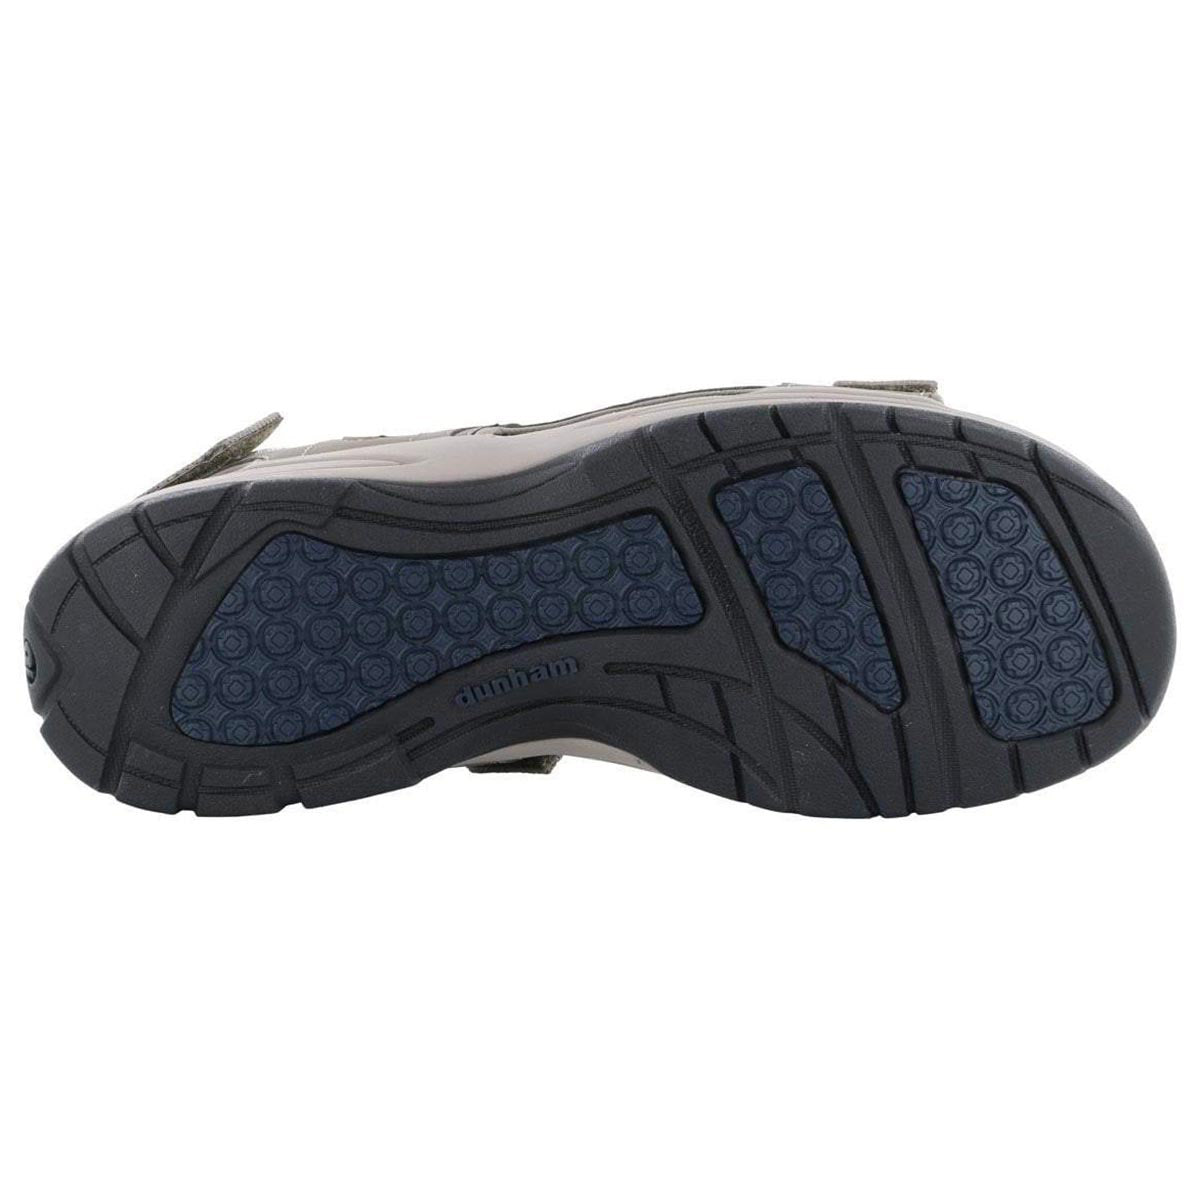 Bottom view of a Dunham sandal featuring a detailed tread pattern and a slip-resistant rubber outsole with Dunham labeling on the sole.